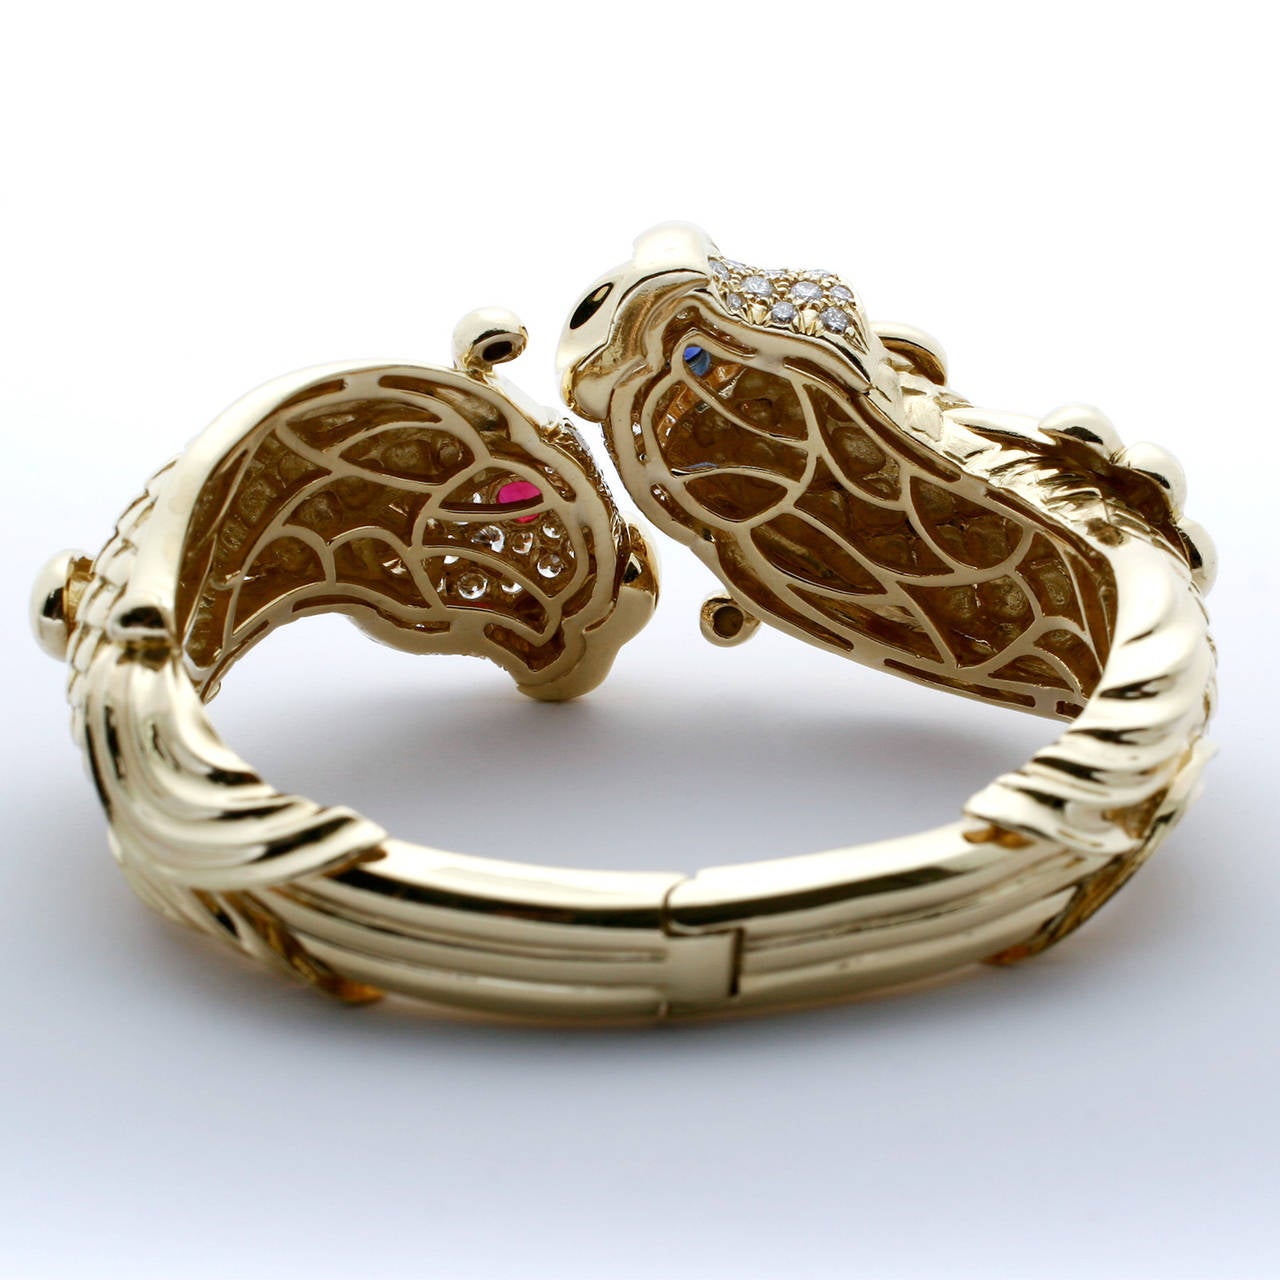 Vintage, Chunky, 18k Yellow Gold Koi Diamond Bangle Bracelet with 70 colorless diamonds weighing 2.60ctw (I/VS) 1 Ruby Eye weighing 0.64ct, and 1 Sapphire Eye weighing 0.62ct. Total Bangle weight is 98.5 grams. Marvelous.
Signed J.Cooper